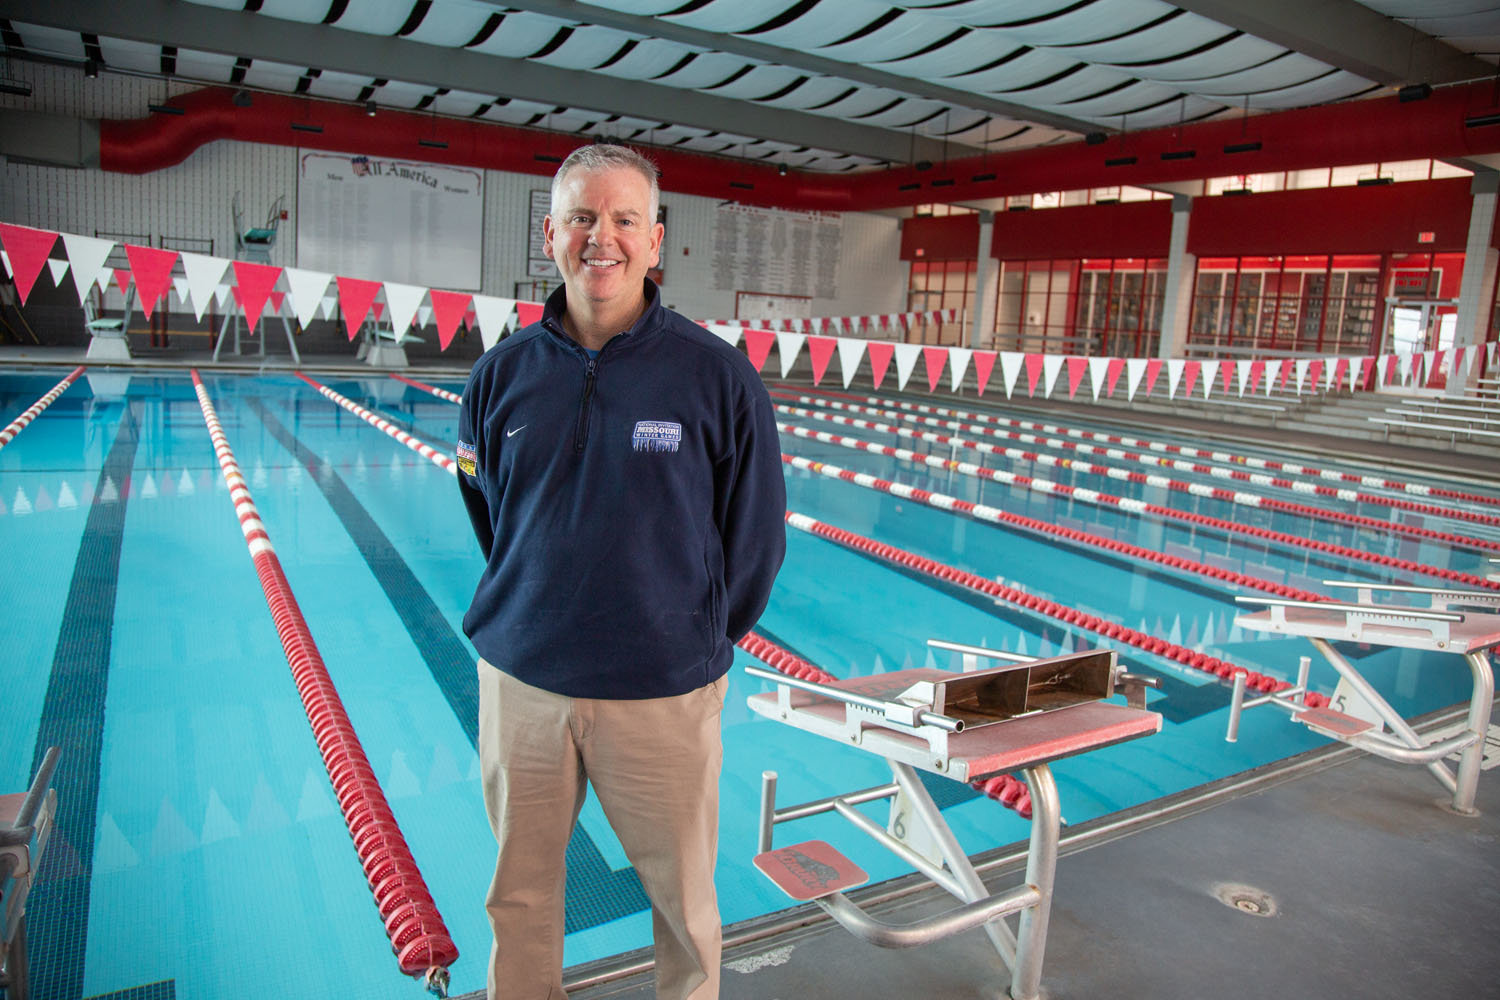 MAKE A SPLASH: Missouri Winter Games founder Jeff Collins wants to expand the annual multisports festival. It's held at several local venues, including the Breech Pool at Drury University.